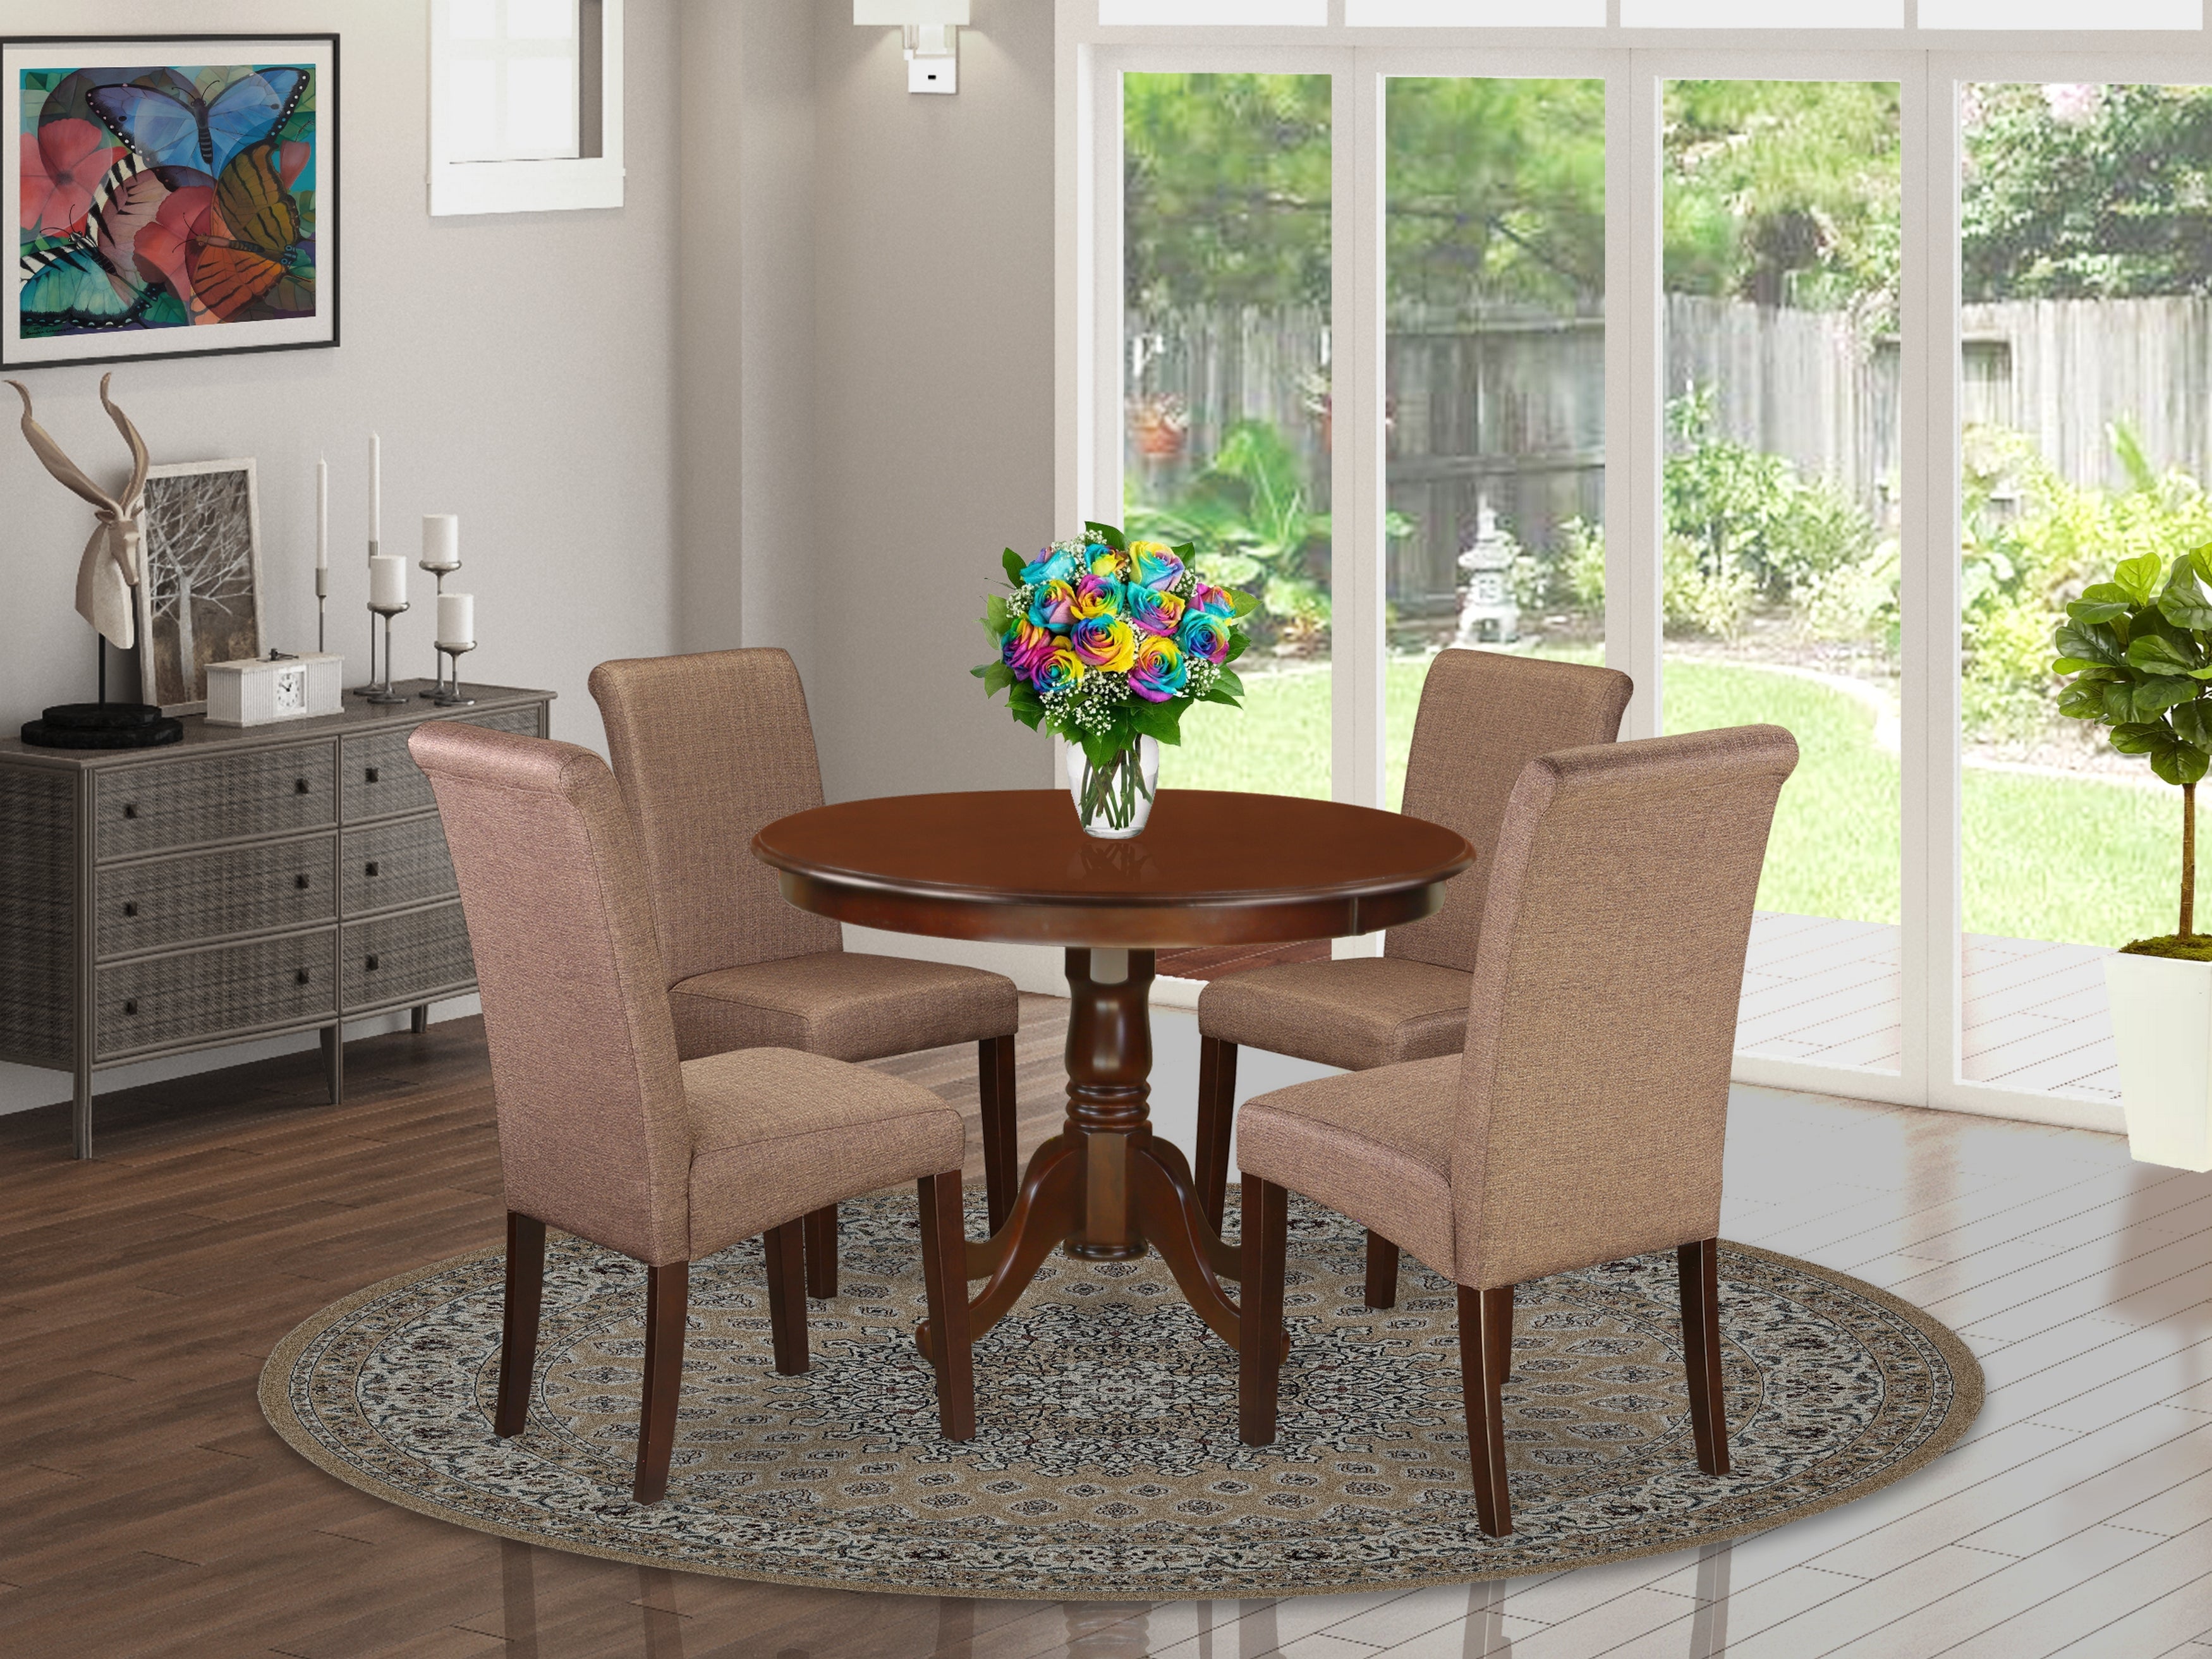 HLBA5-MAH-18 5Pc Small Round table with linen brown fabric Parson chairs with mahogany chair legs